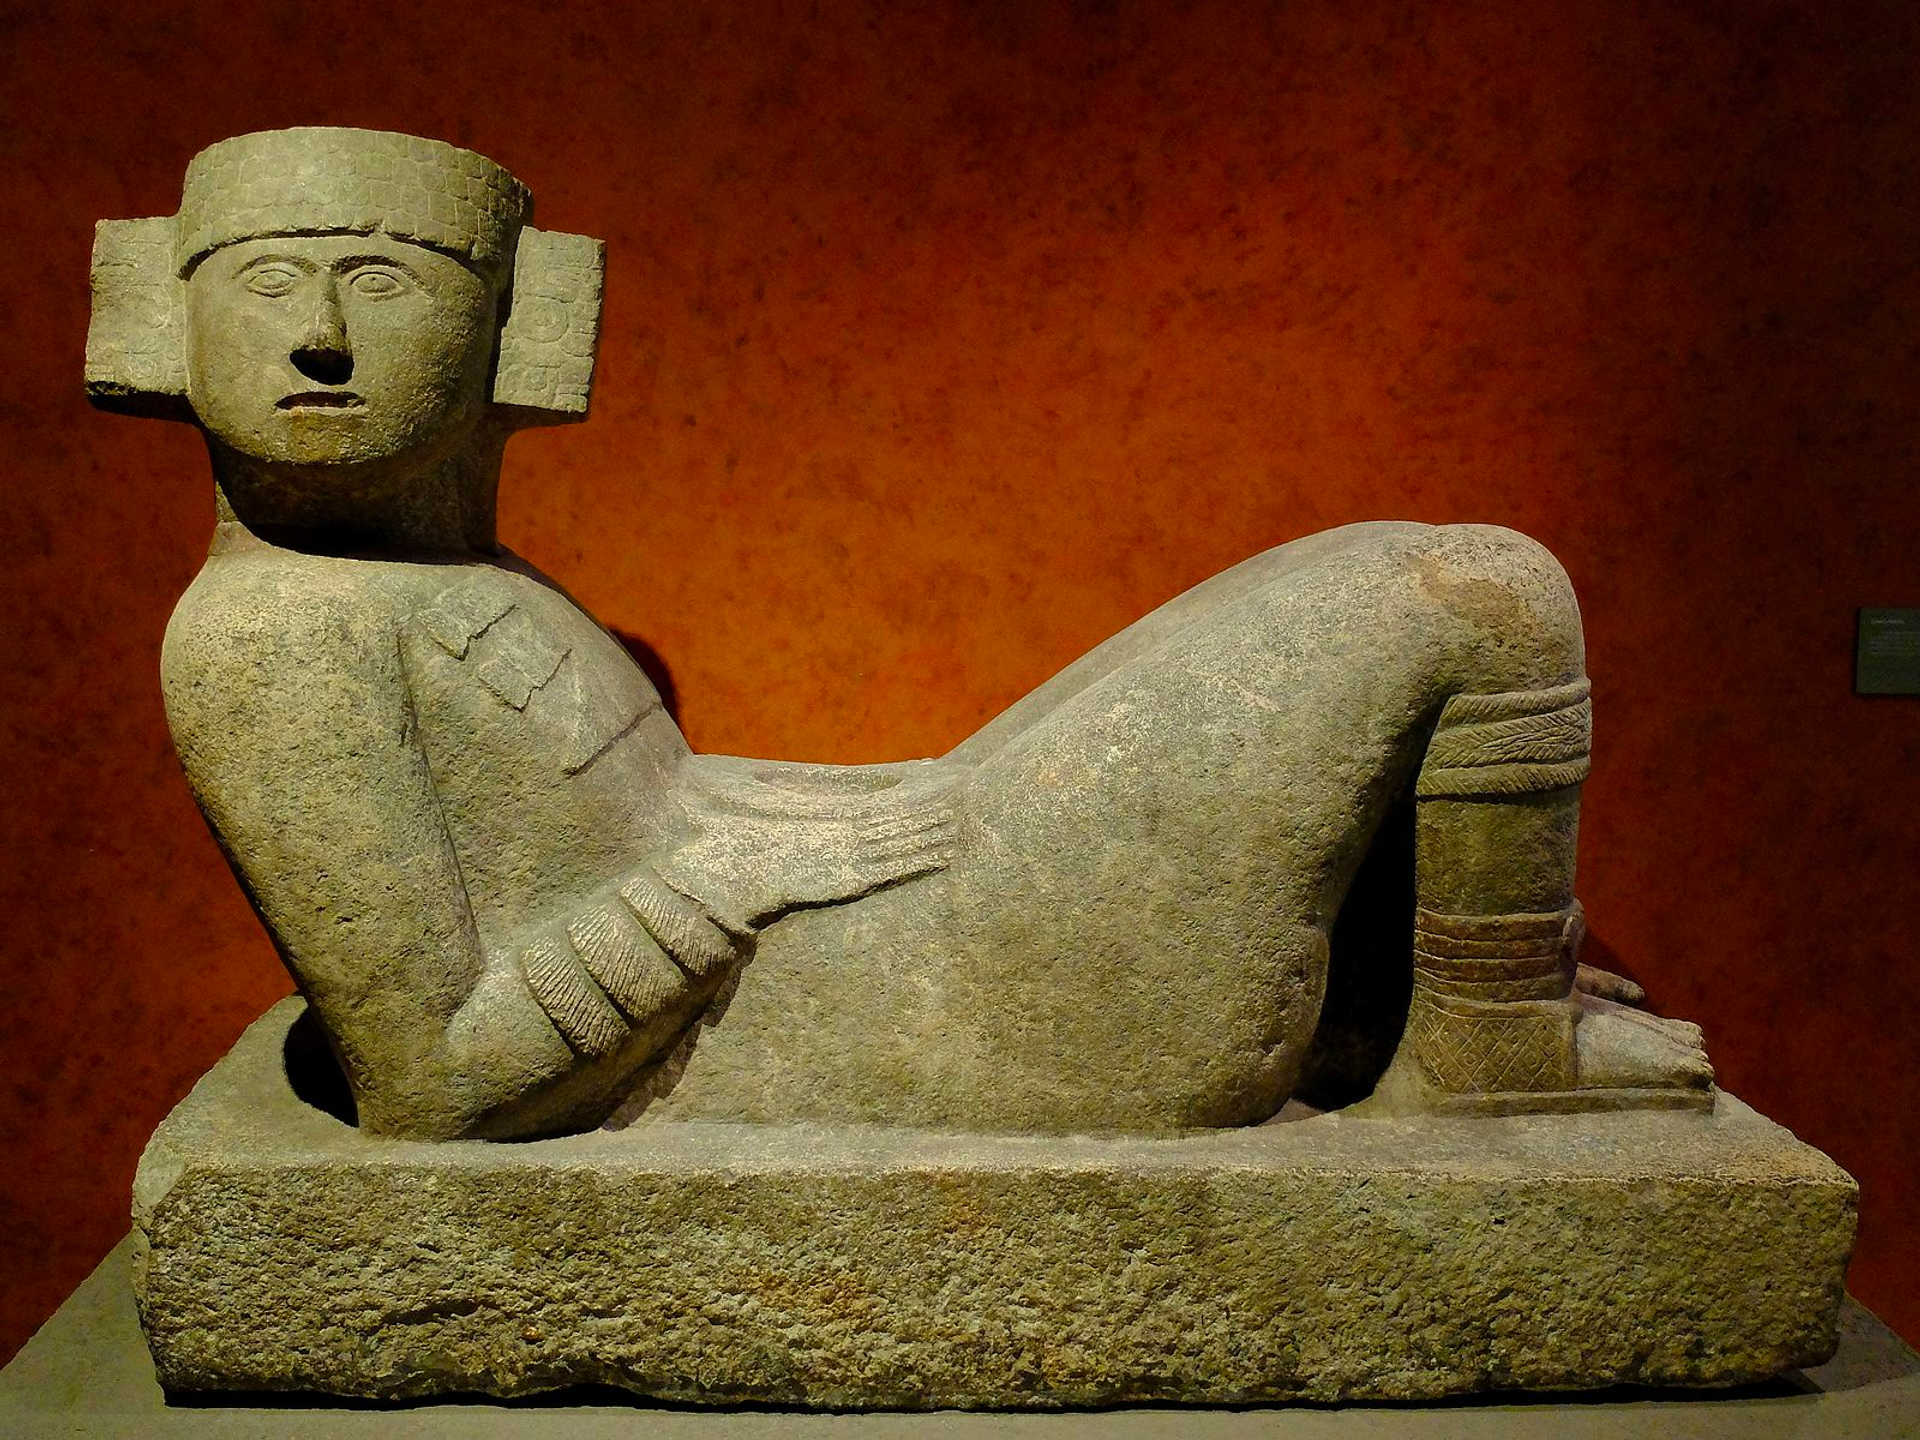 Abstract sculpture of a reclining figure with knees propped up, resting on forearms. The sculpture's head faces the viewer, adorned with a headdress. Imprints of decorative sandals are visible, extending up to the knees. The figure's hands rest on its lap.